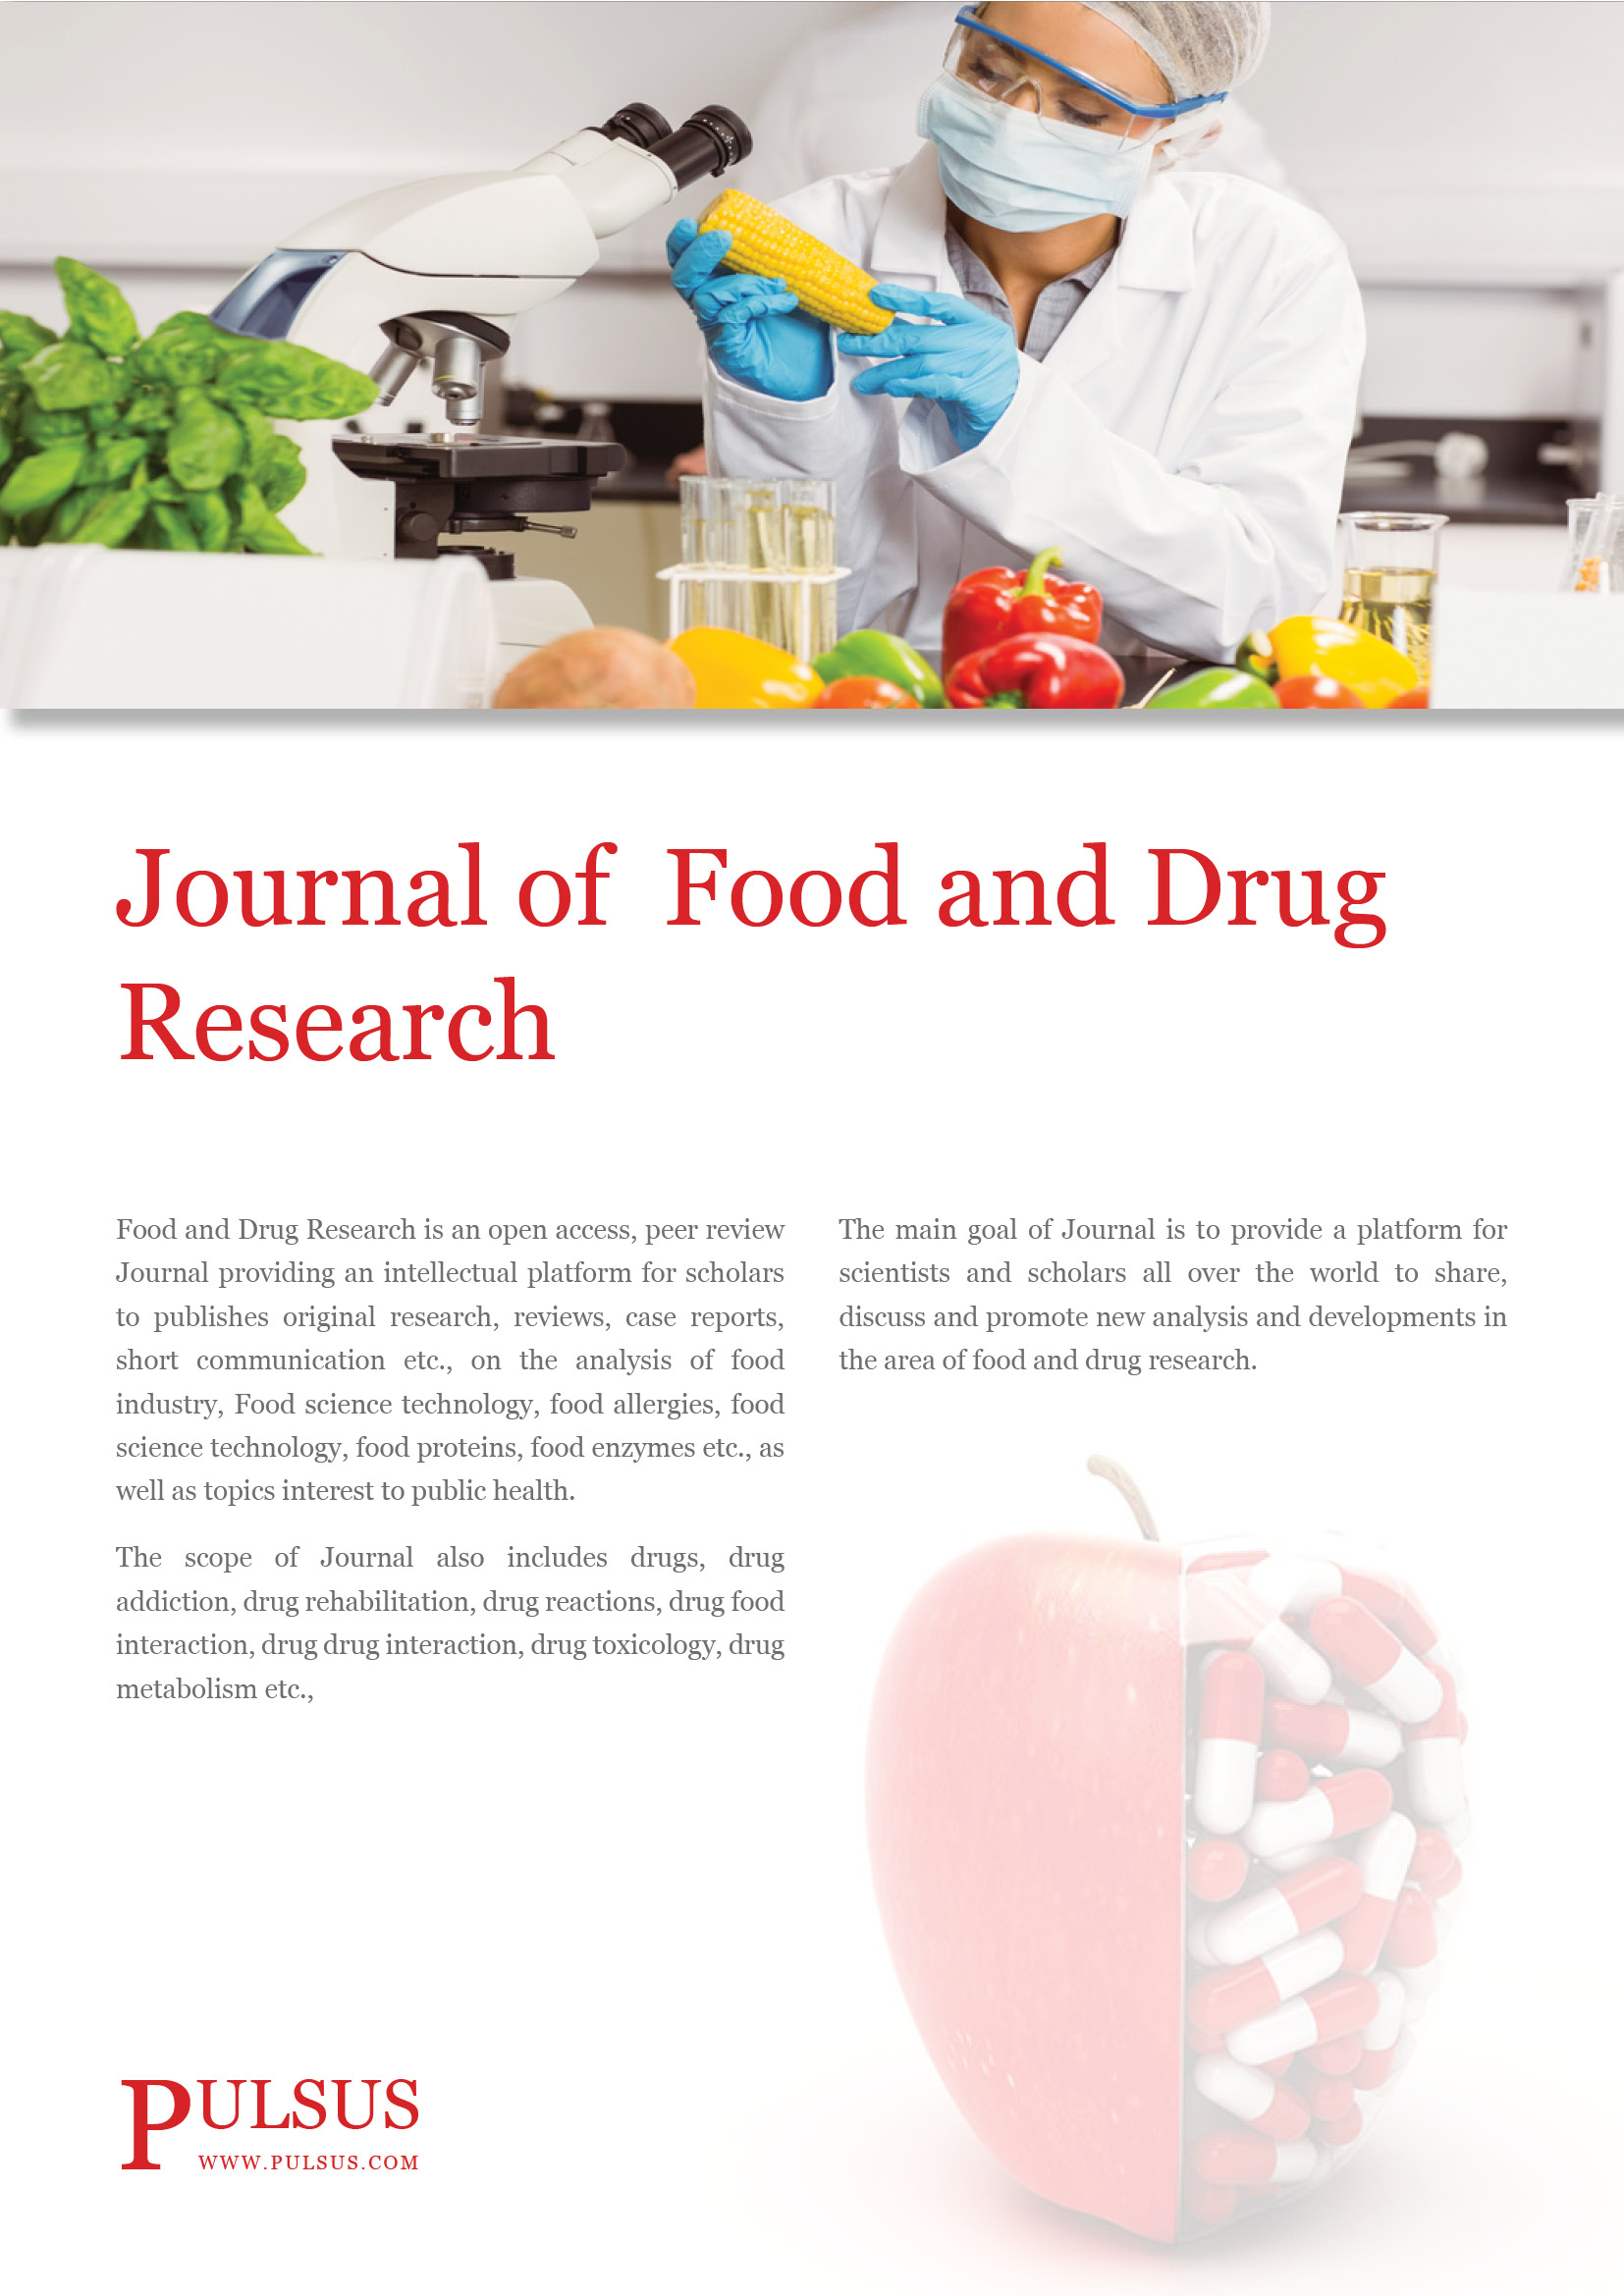 Journal of Food and Drug Research